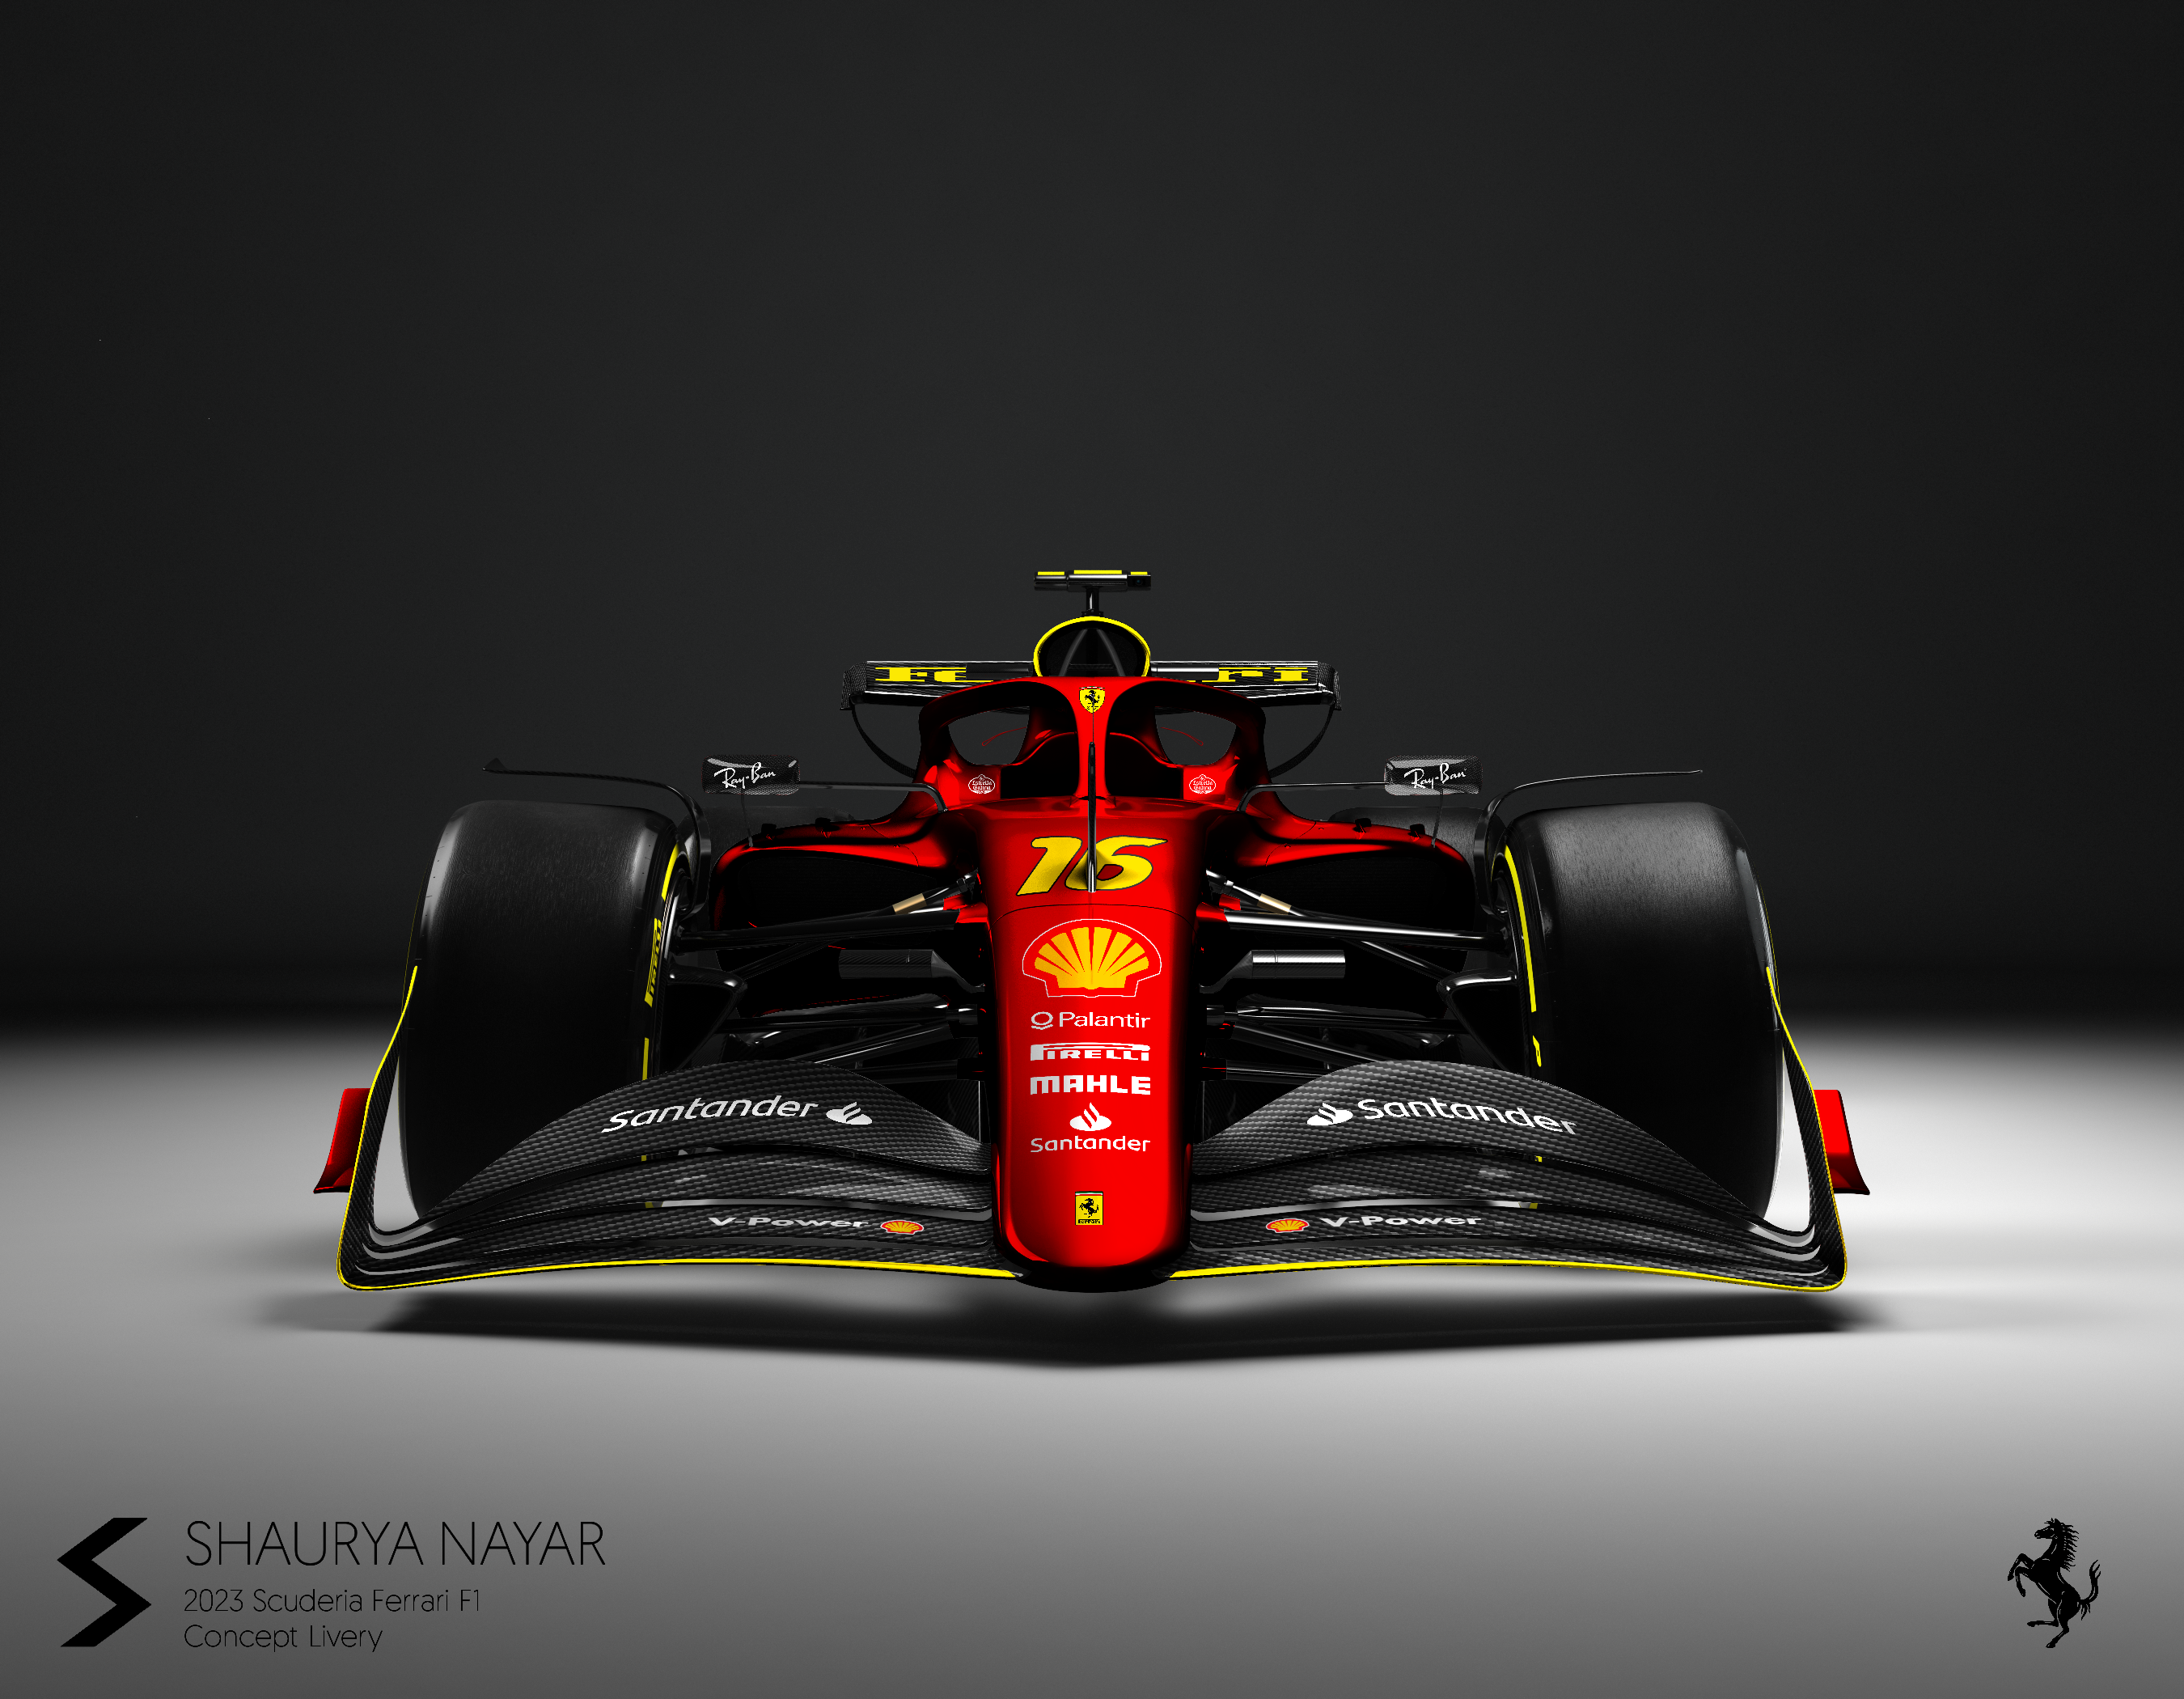 Unprecedented Speed or Lack of Reliability  Ferraris 2023 Car Faces  Uphill Challenge  The SportsRush